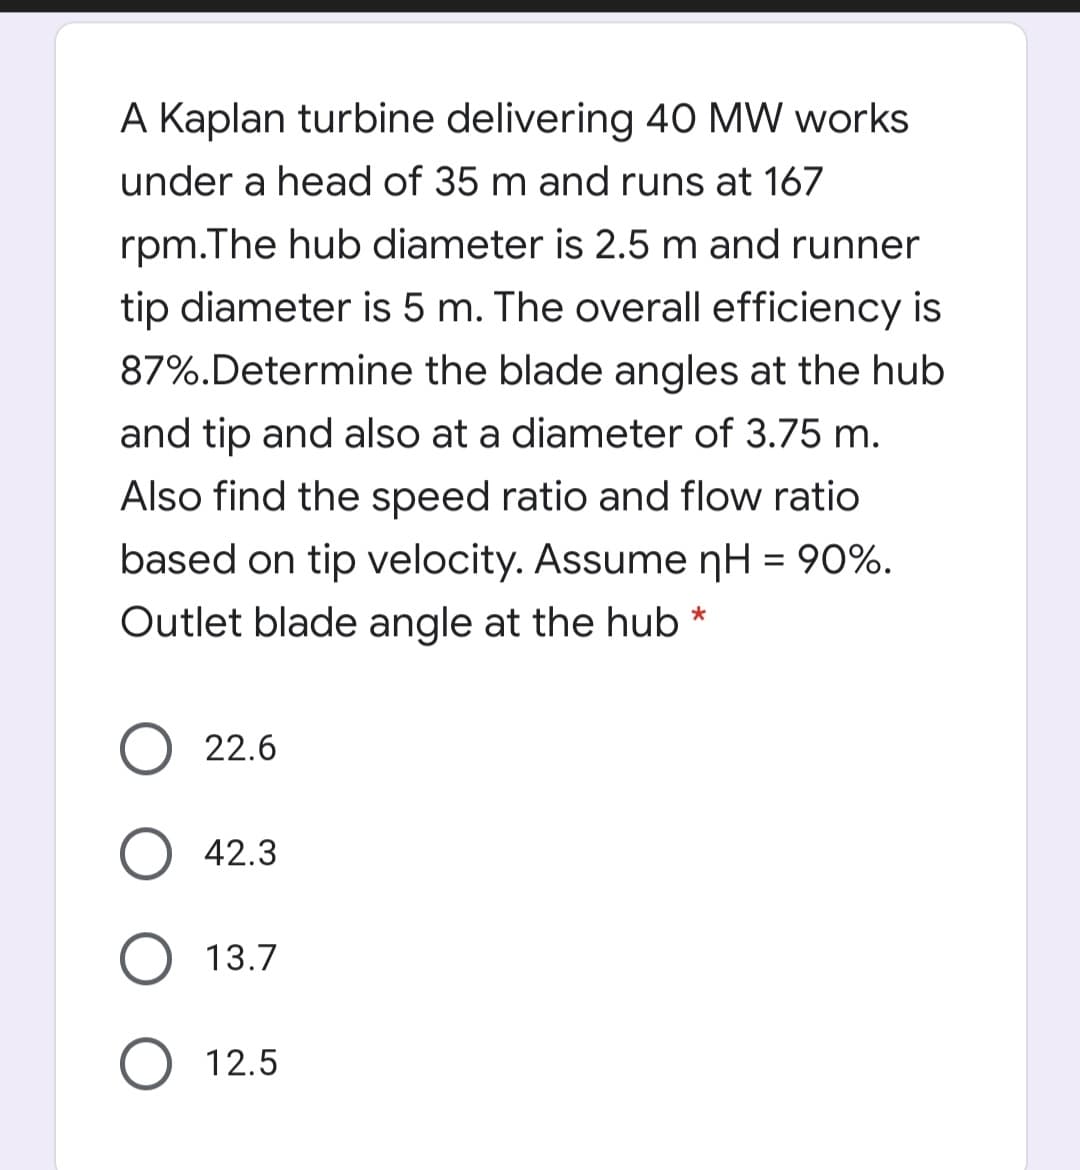 A Kaplan turbine delivering 40 MW works
under a head of 35 m and runs at 167
rpm.The hub diameter is 2.5 m and runner
tip diameter is 5 m. The overall efficiency is
87%.Determine the blade angles at the hub
and tip and also at a diameter of 3.75 m.
Also find the speed ratio and flow ratio
based on tip velocity. Assume nH = 90%.
Outlet blade angle at the hub *
22.6
O 42.3
13.7
12.5
